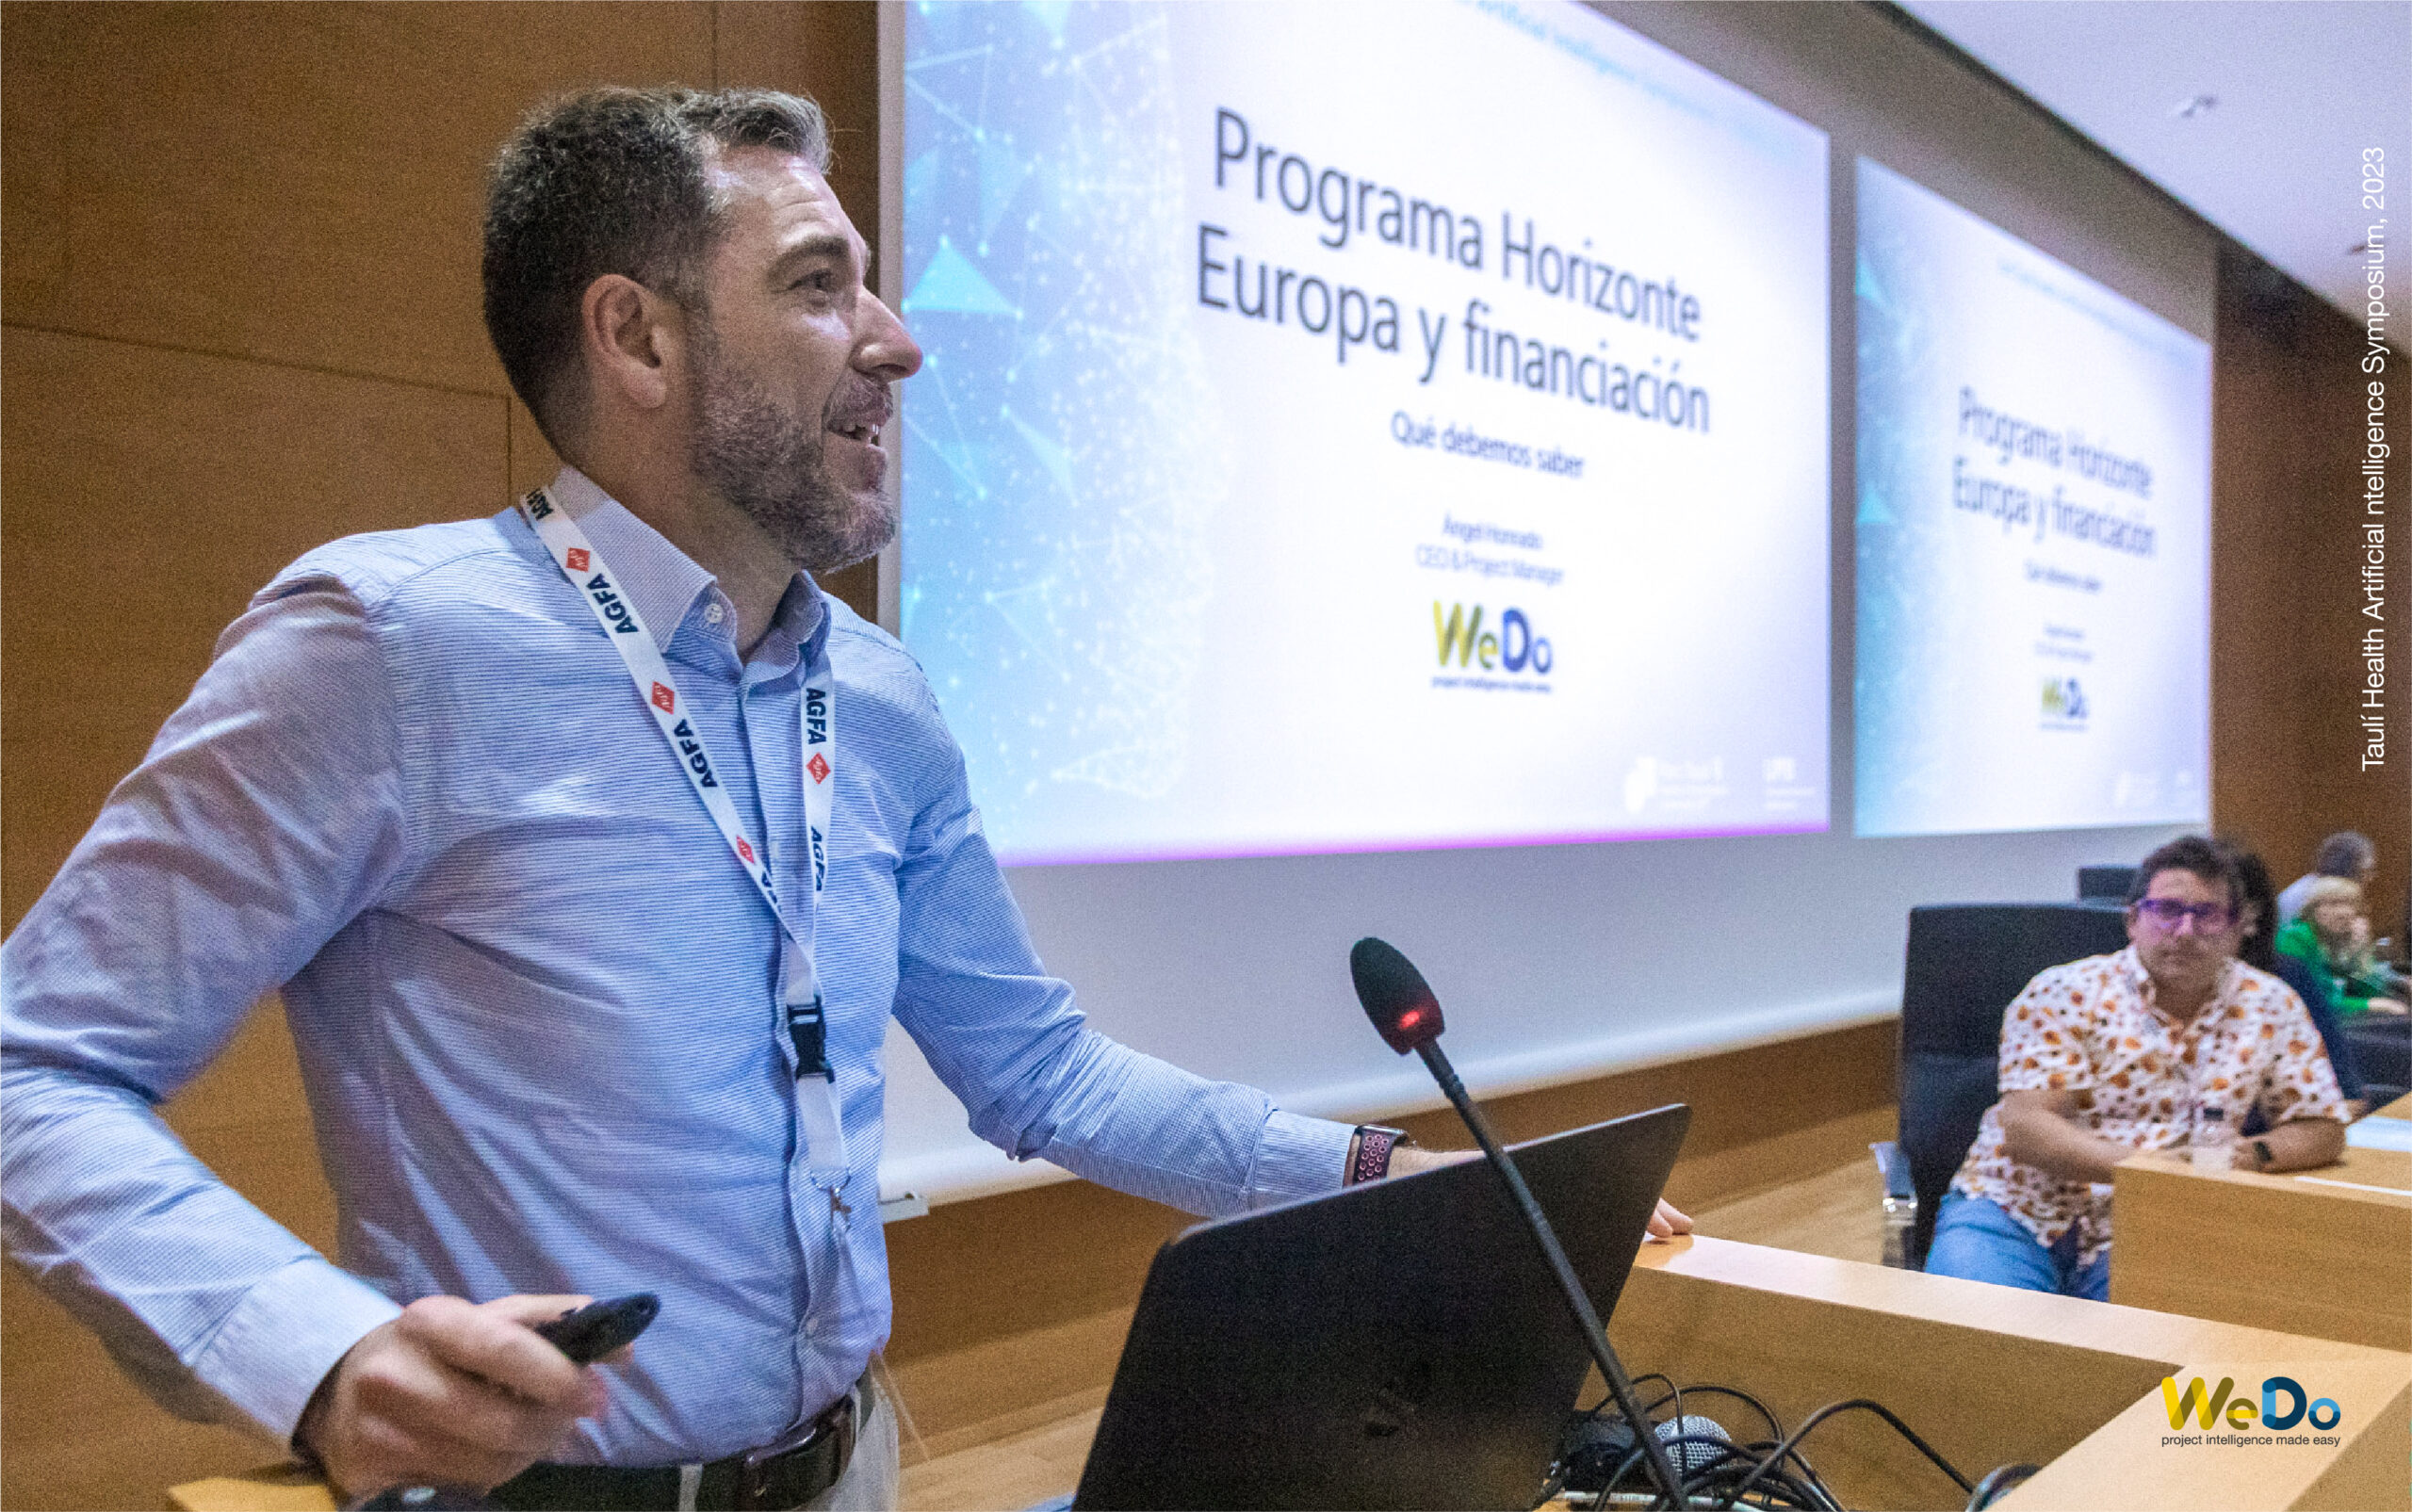 WeDo's CEO, Ángel Honrado, participated for a second year in the Taulí Health Artificial Intelligence Symposium, joining the discussion on AI research: challenges to consider with the session "AI in the context of the Horizon Europe programme. What we need to know".